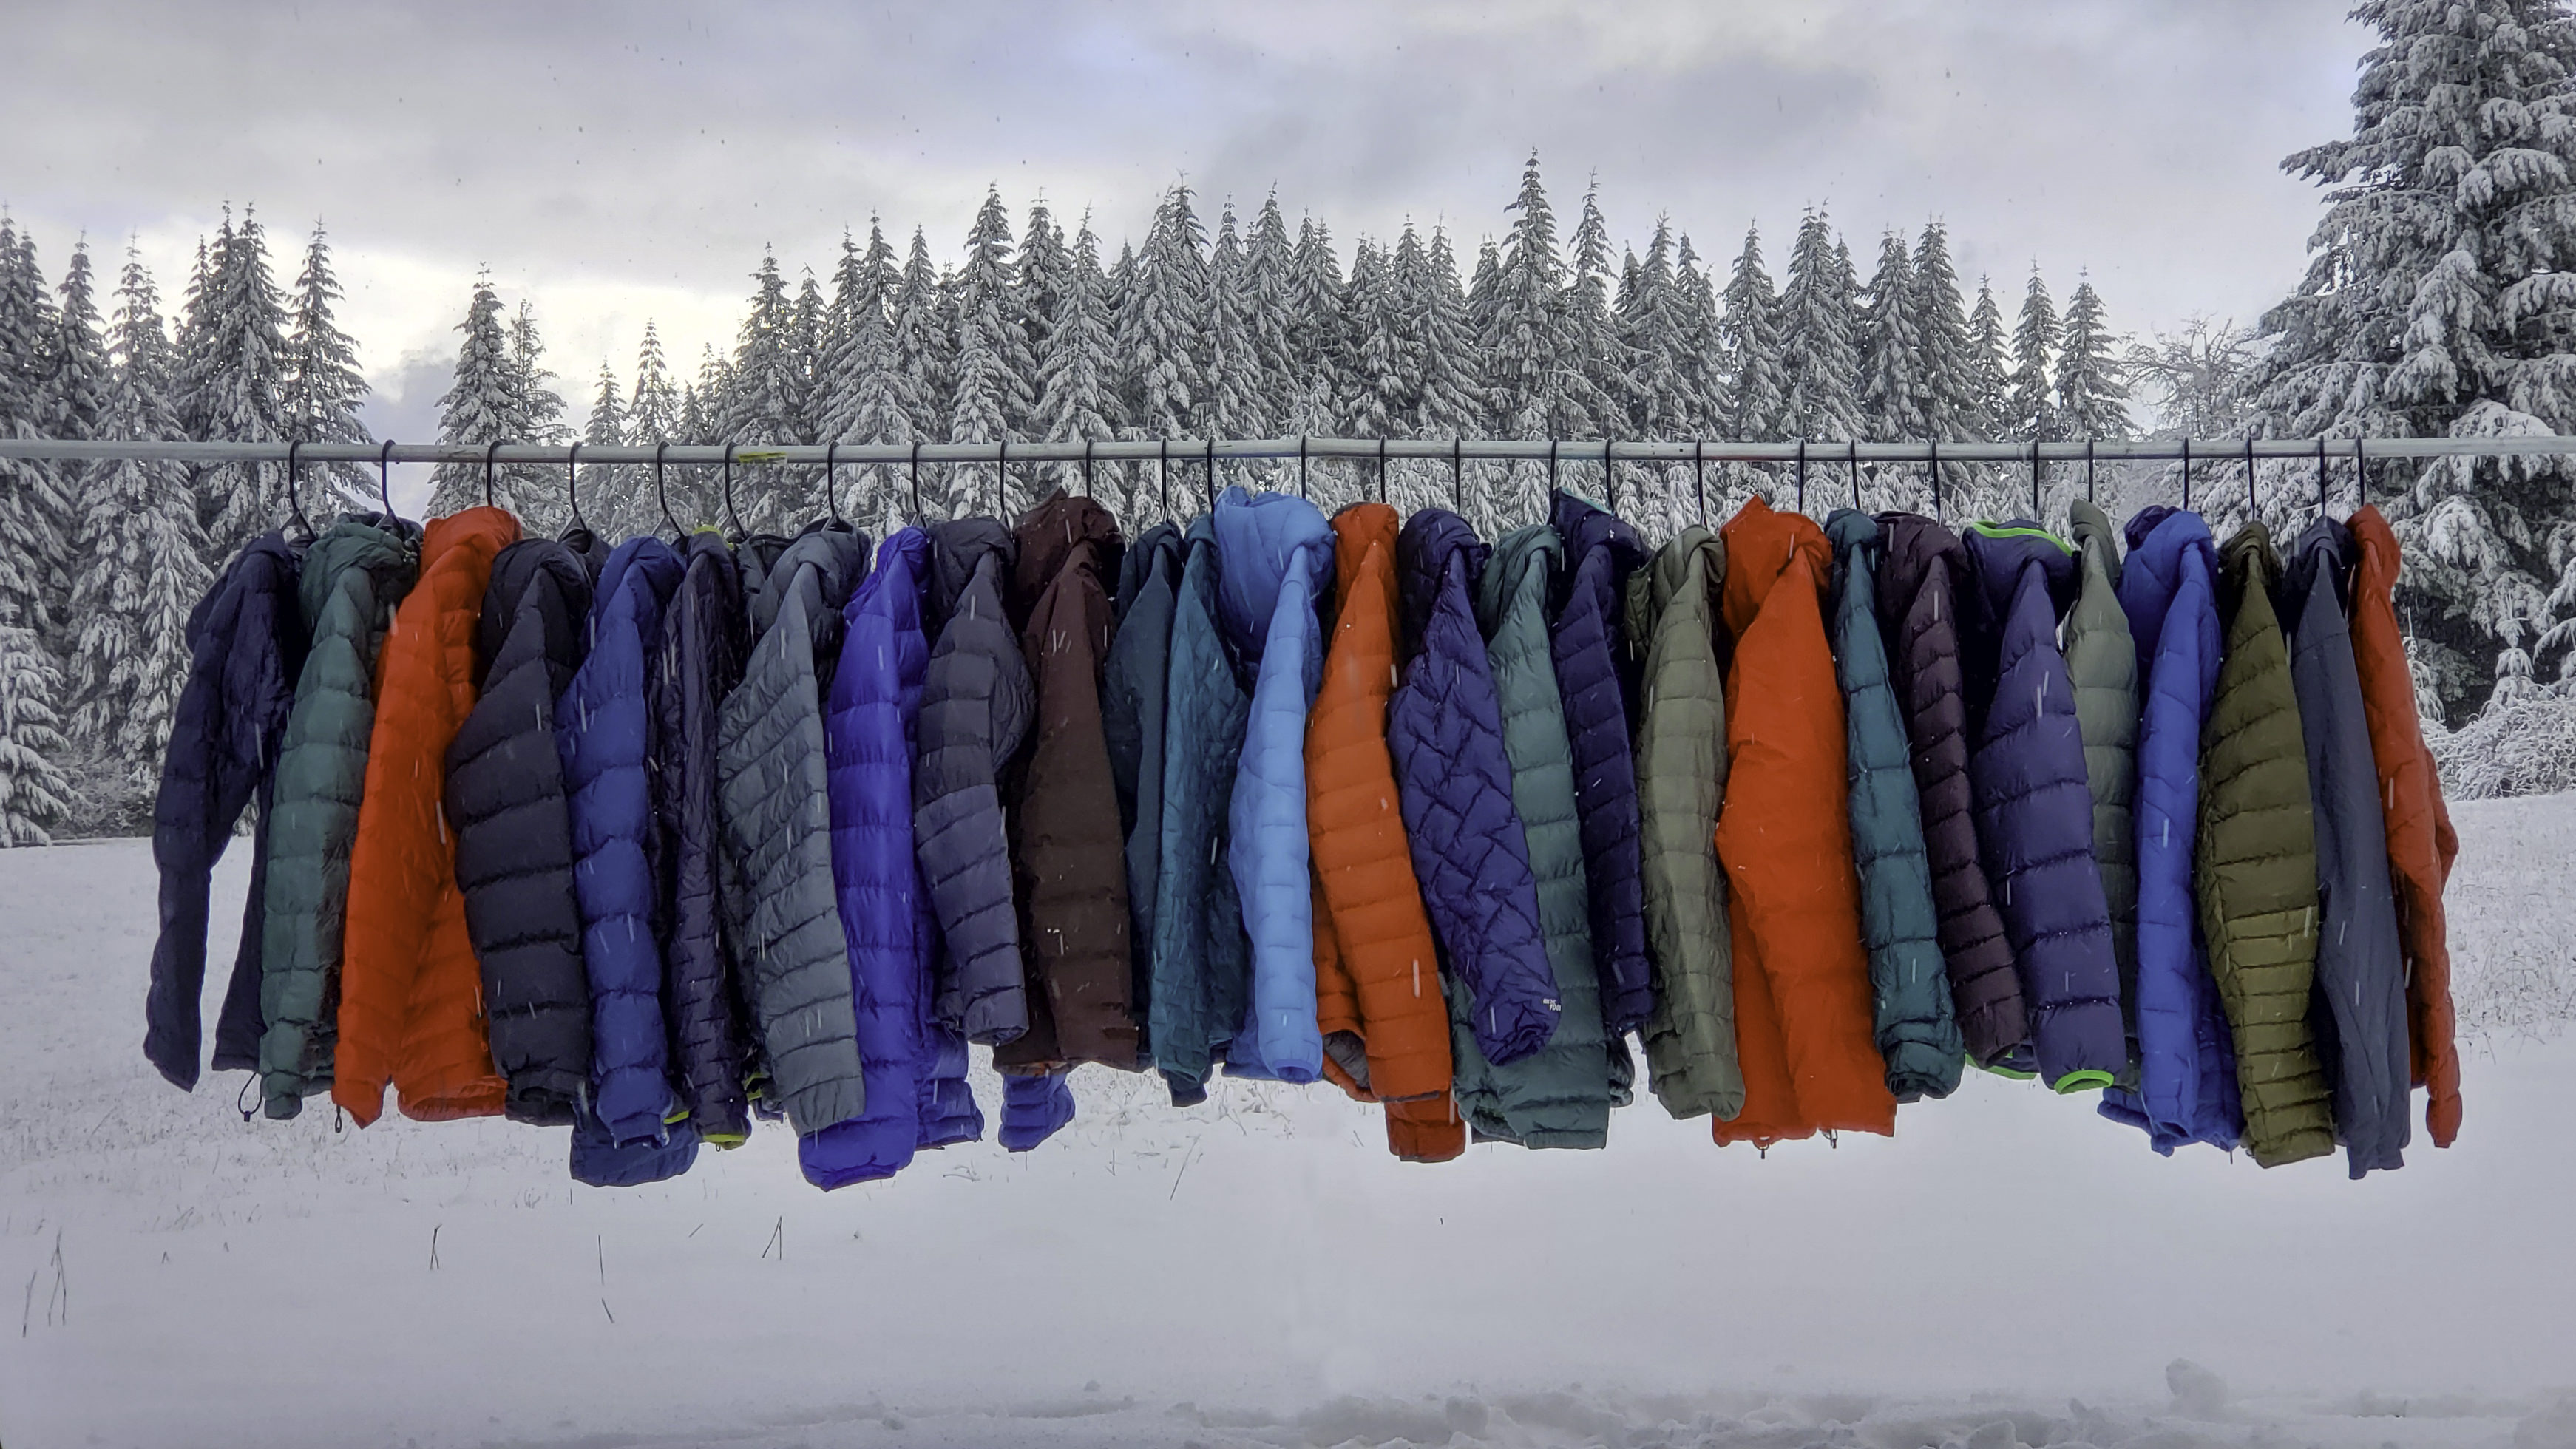 Lots of down jackets on a rod in front of a snowy outdoor scene